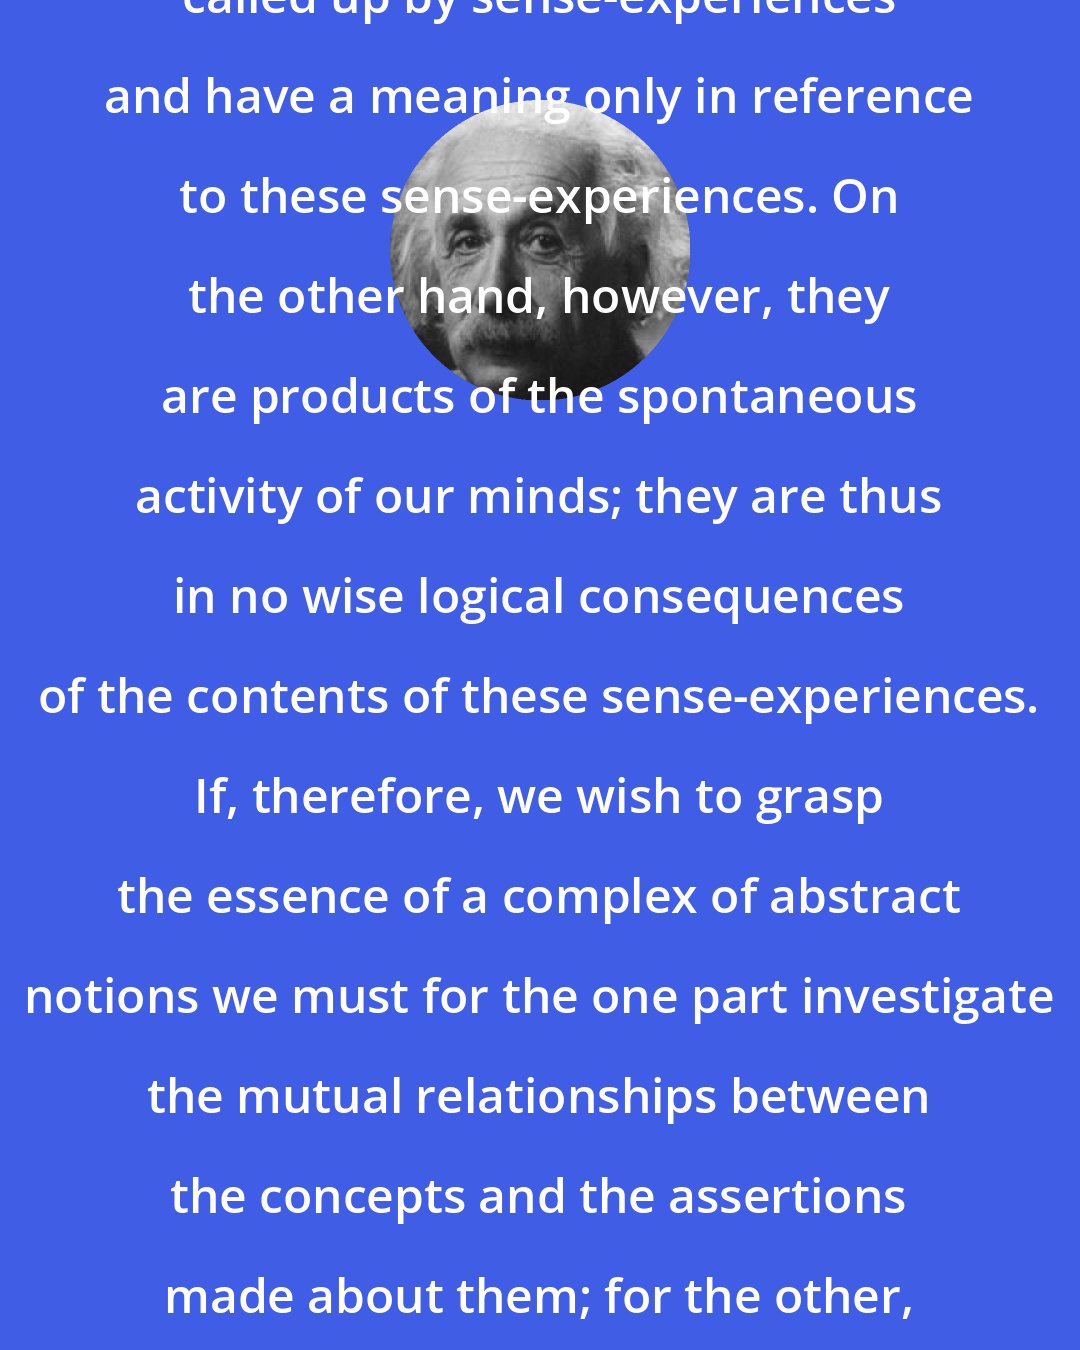 Albert Einstein: All our thoughts and concepts are called up by sense-experiences and have a meaning only in reference to these sense-experiences. On the other hand, however, they are products of the spontaneous activity of our minds; they are thus in no wise logical consequences of the contents of these sense-experiences. If, therefore, we wish to grasp the essence of a complex of abstract notions we must for the one part investigate the mutual relationships between the concepts and the assertions made about them; for the other, we must investigate how they are related to the experiences.